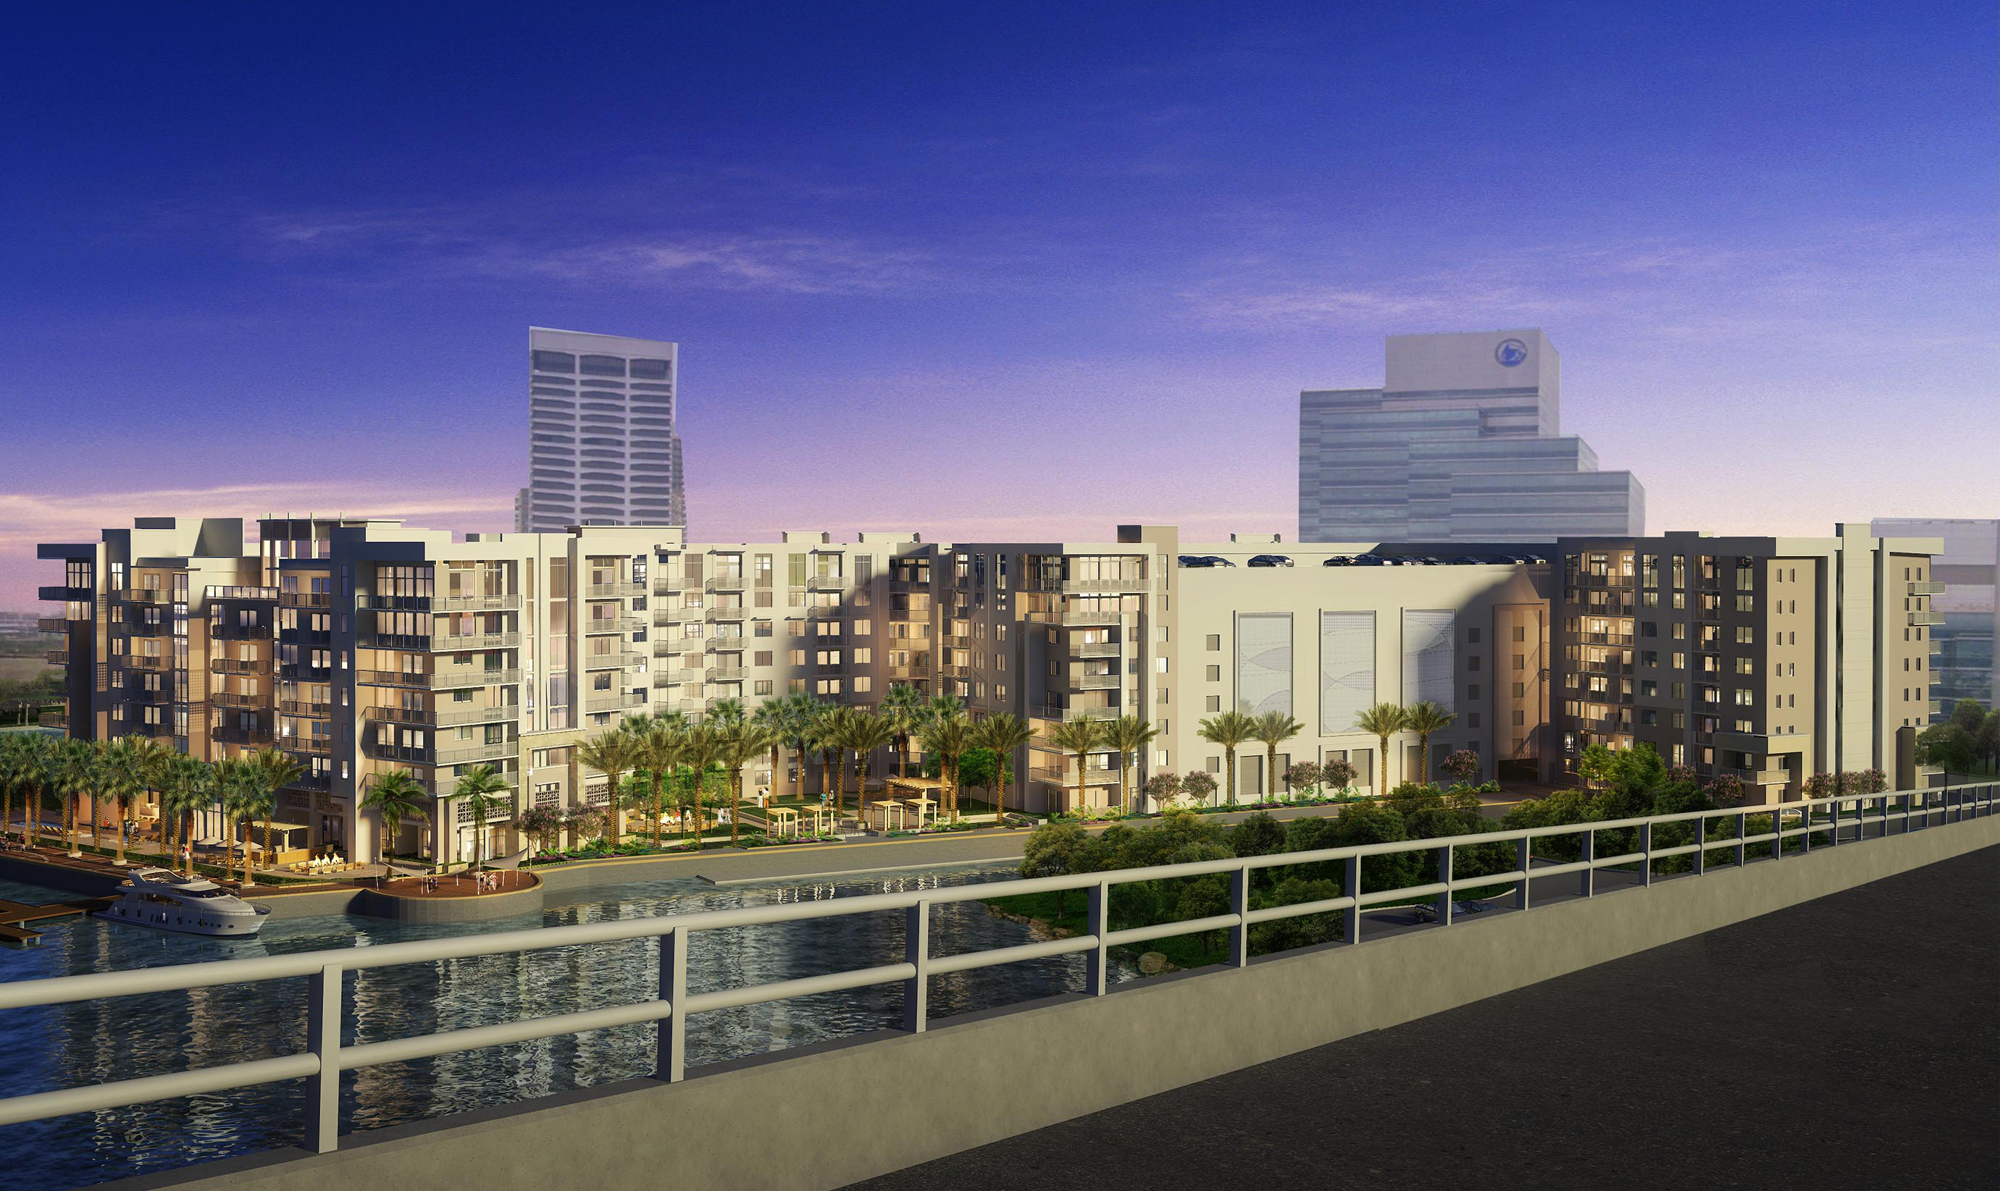 An artist's rendering of the RD River City apartment development from the Acosta Bridge.